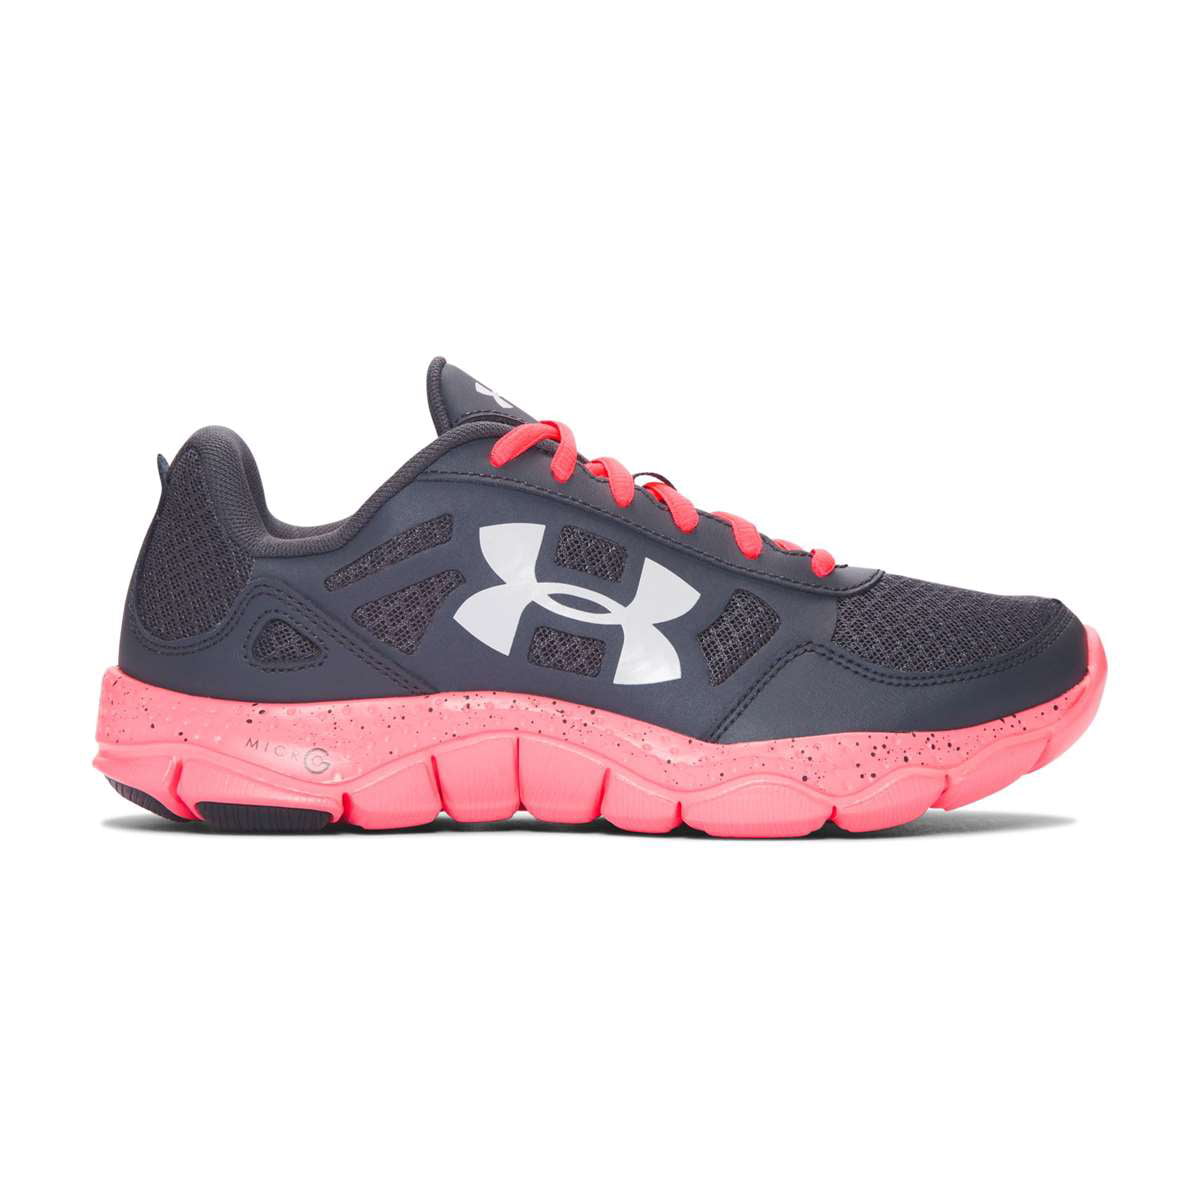 Under Armour Micro G Engage 2 Mens Black Running Road Sports Shoes Trainers 